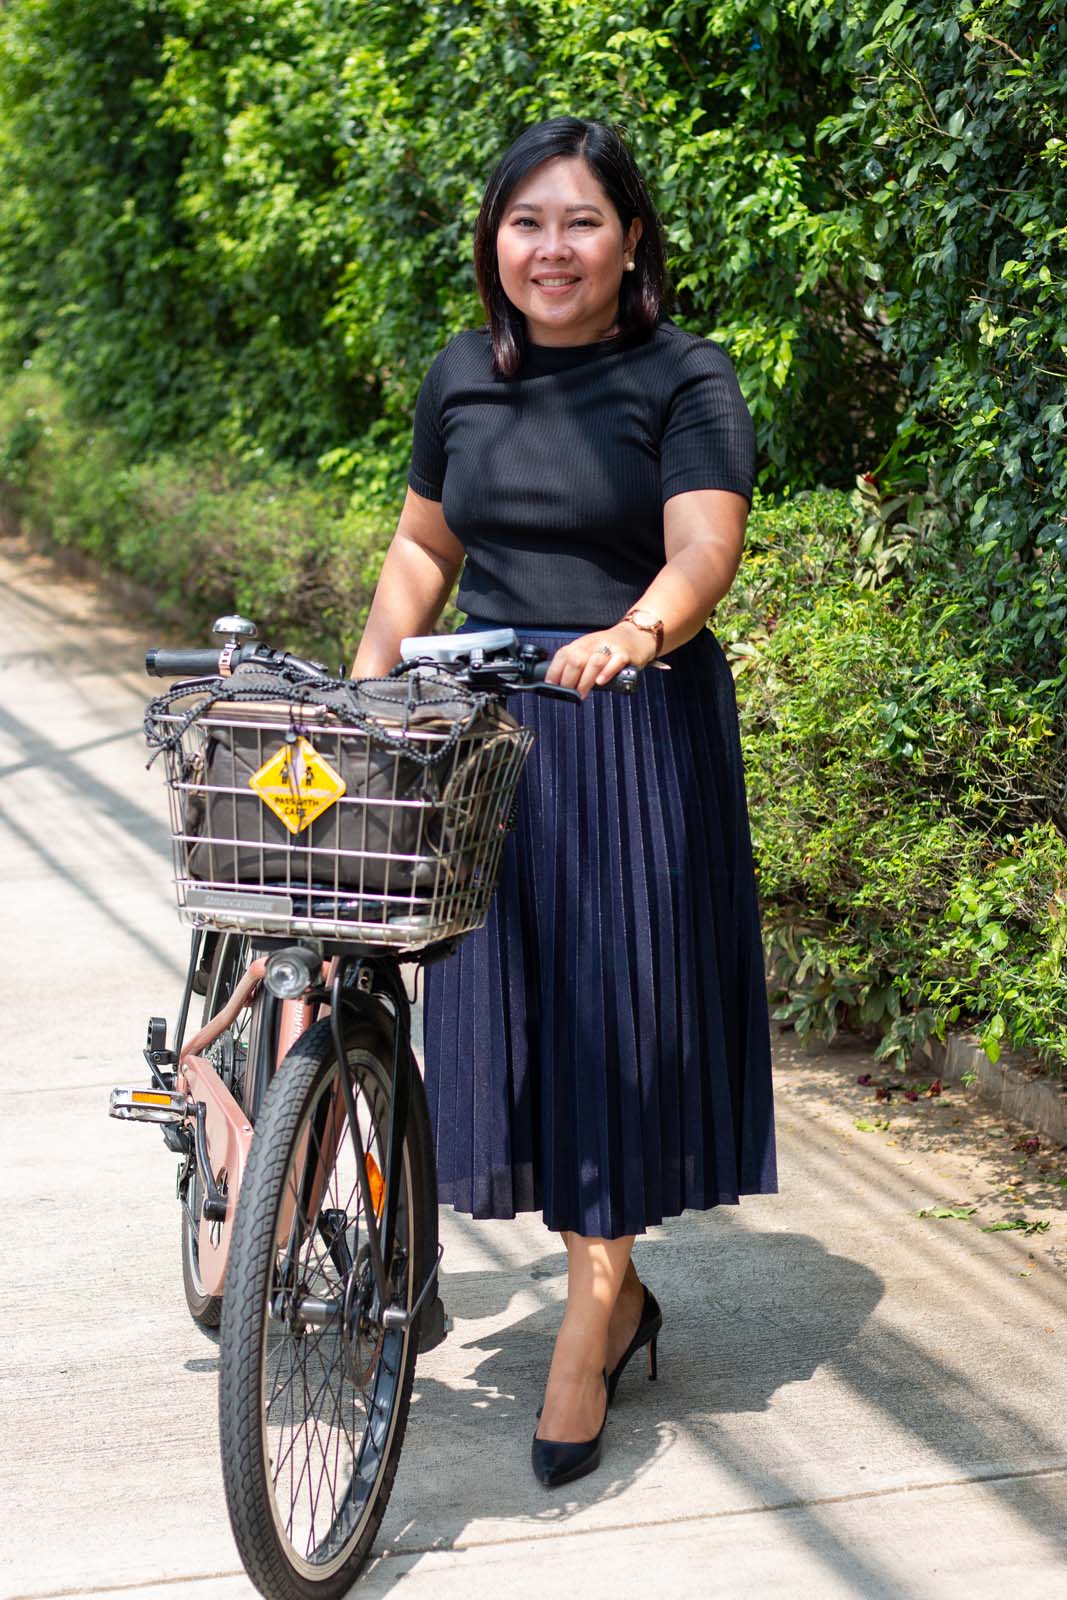 After biking six kilometers from her home to her office, Jaramia Amarnani changes into her office clothes and stiletto shoes. Her co-workers are often surprised when they learn that she bikes to work every day. Photo by Jhesset O. Enano